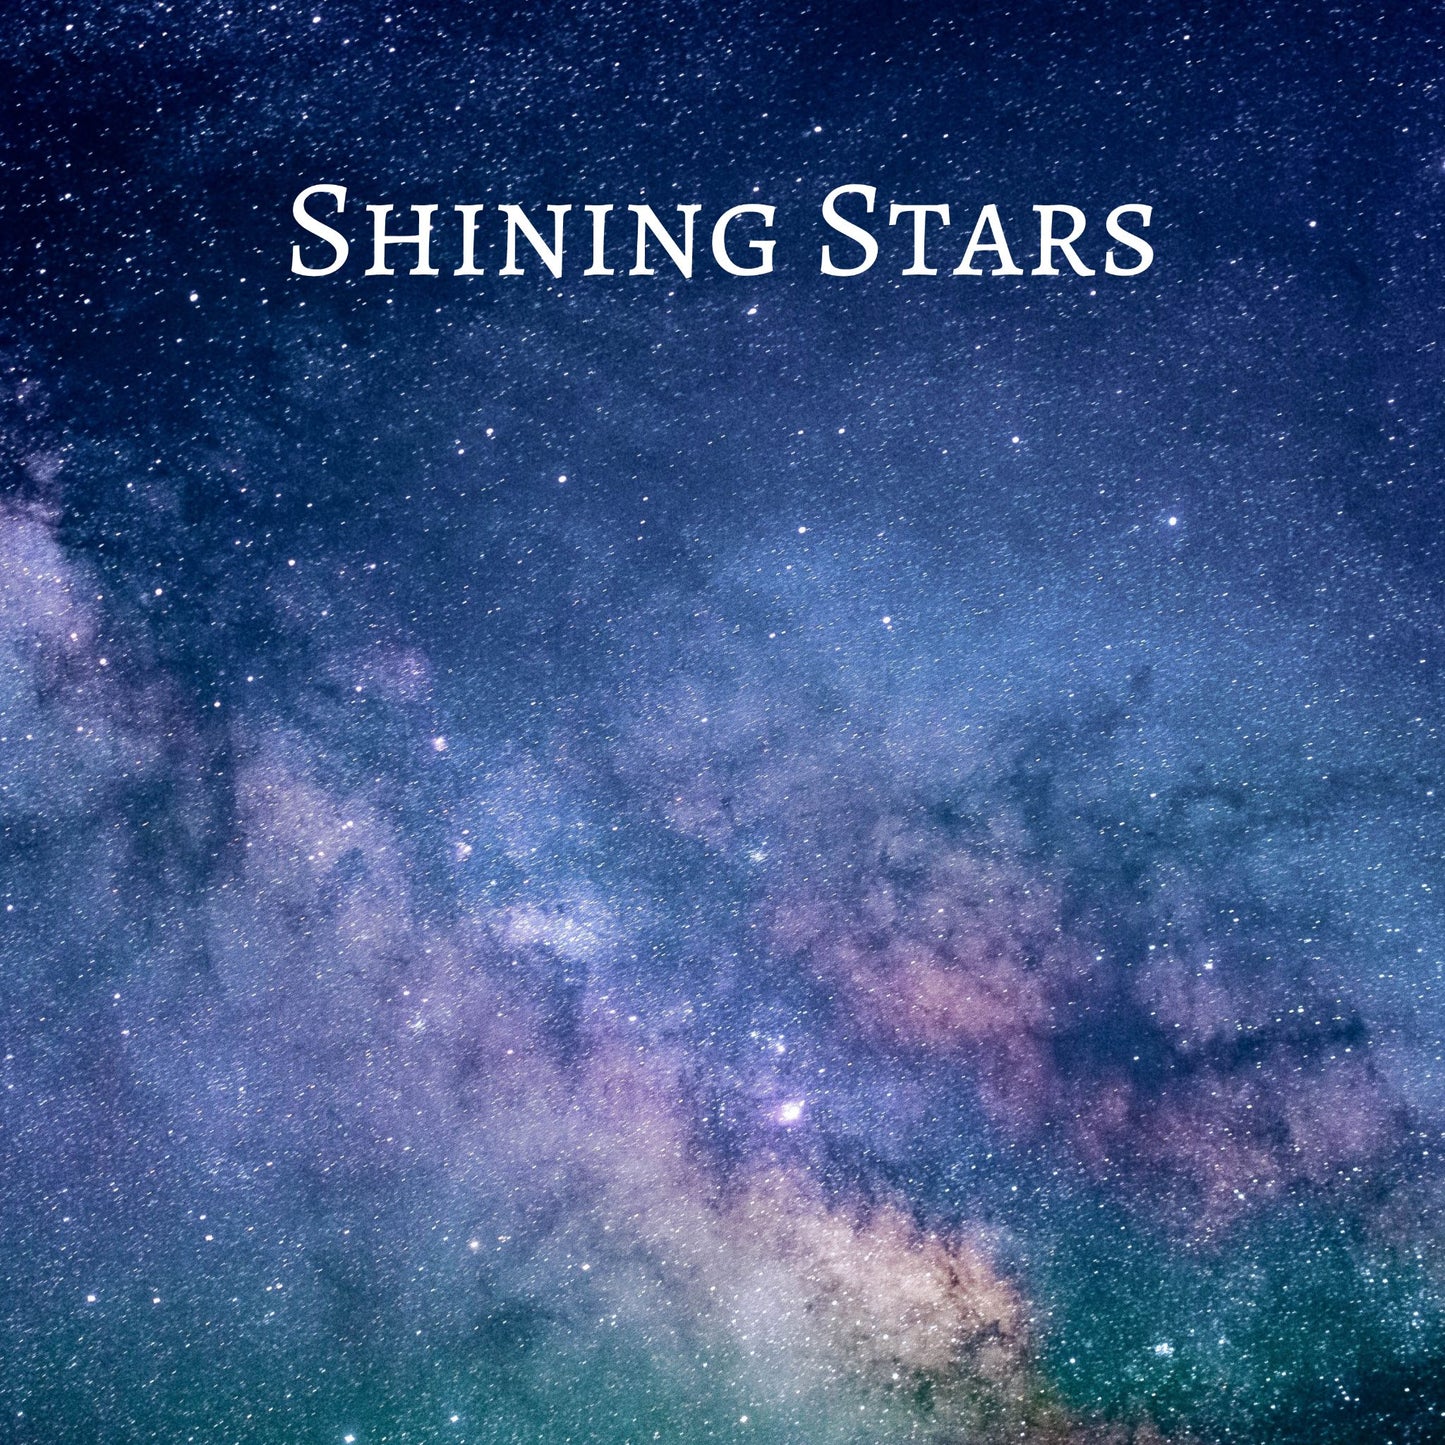 CD Cover of song Shining Stars